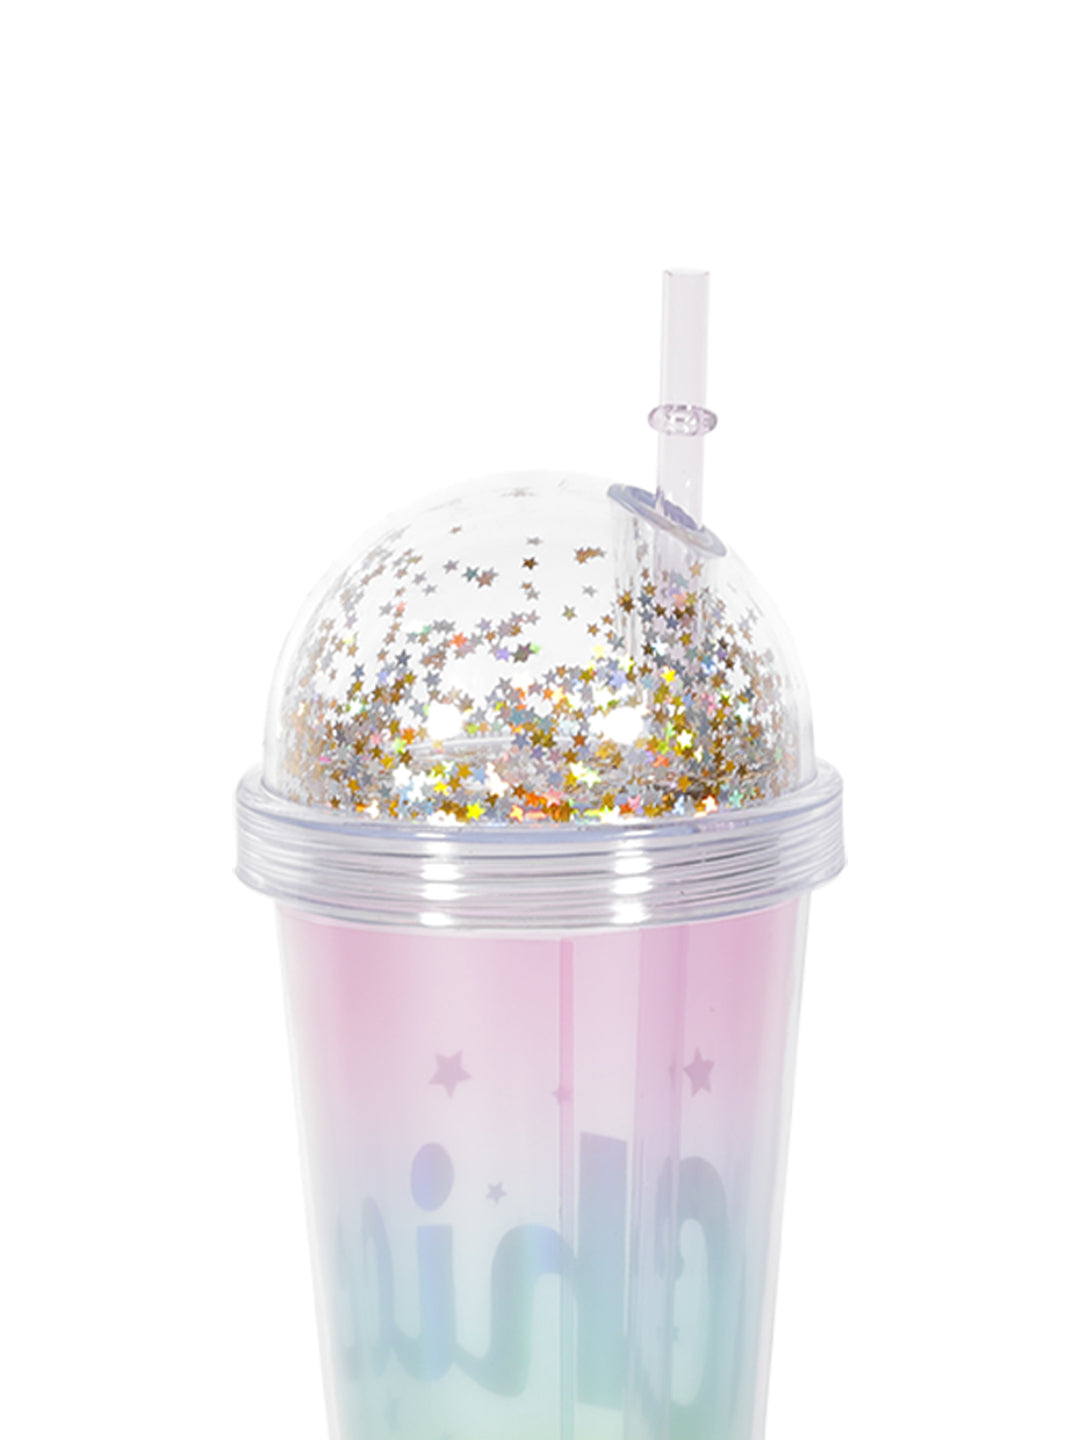 VON CASA Plastic Tumbler With Straw And Lid - 380Ml